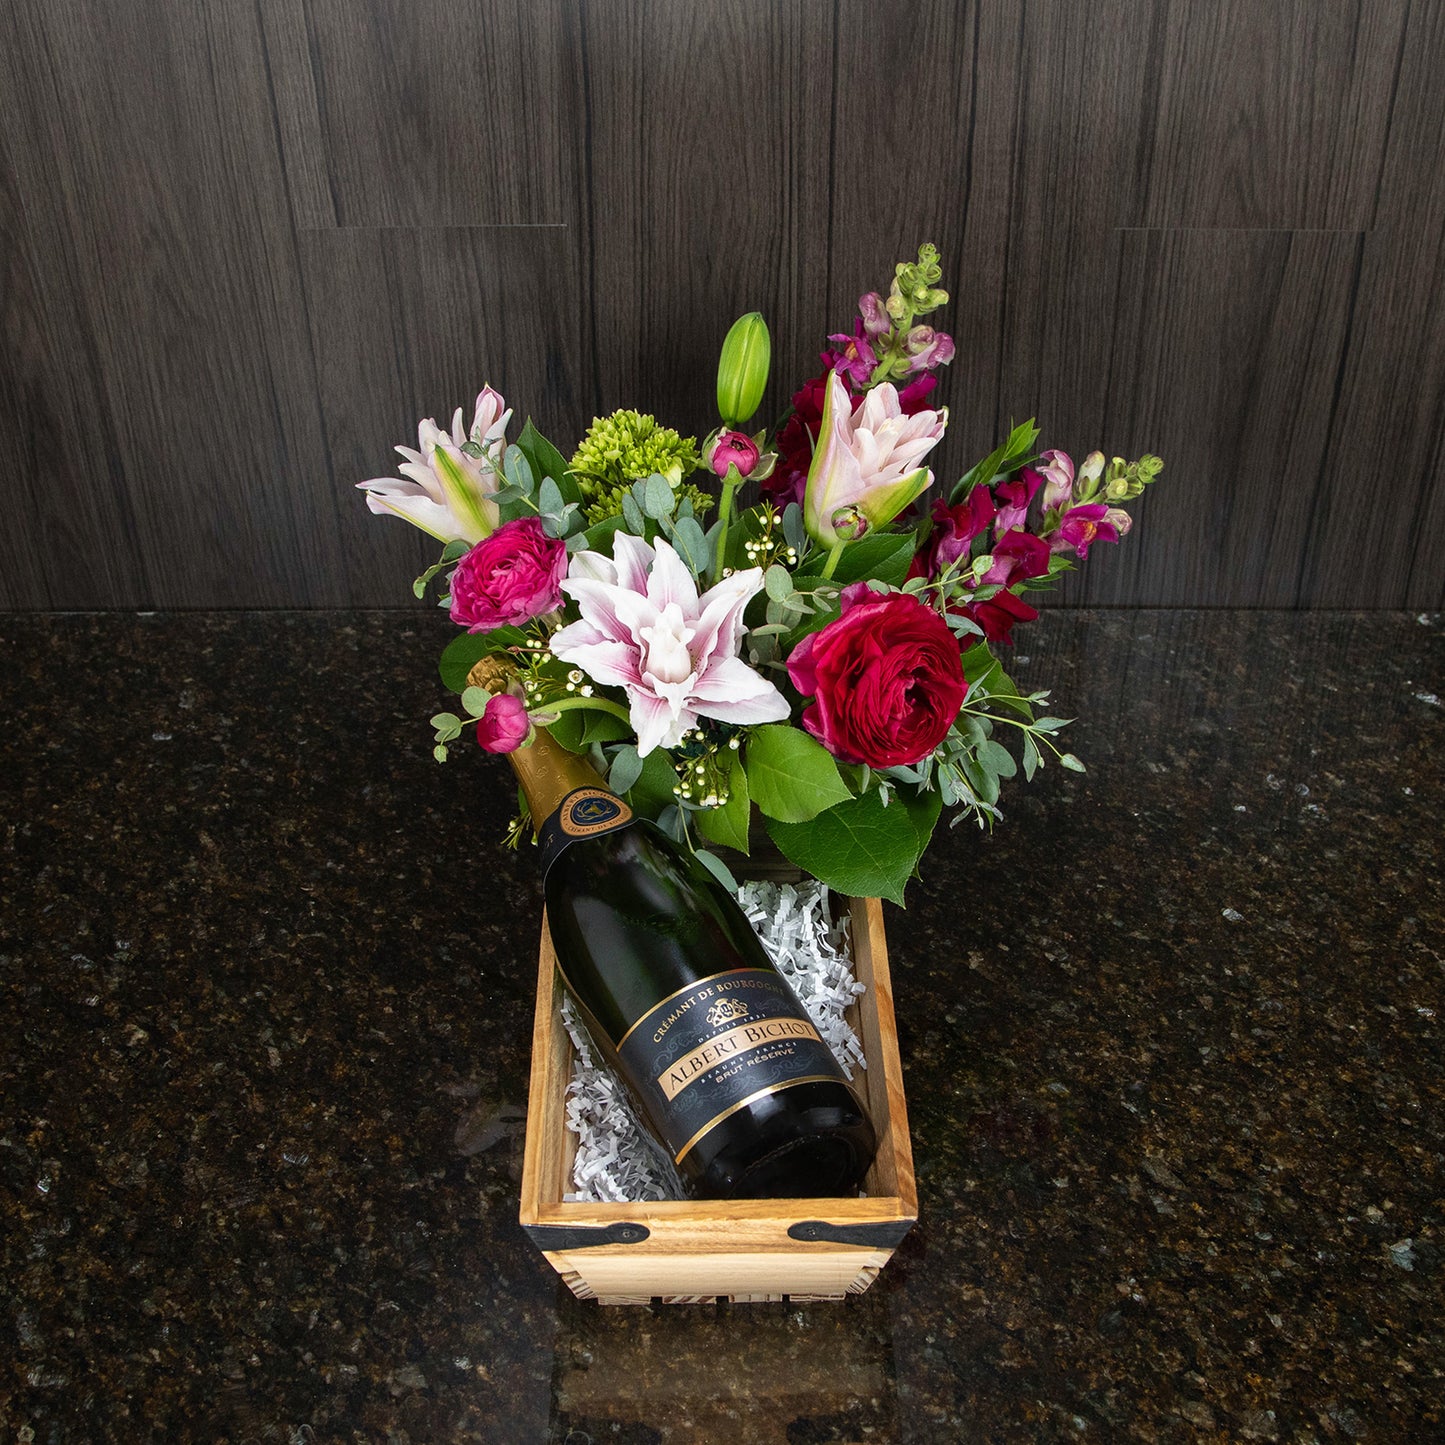 a wooden basket that contains a flower arrangement and a bottle of sparkling wine